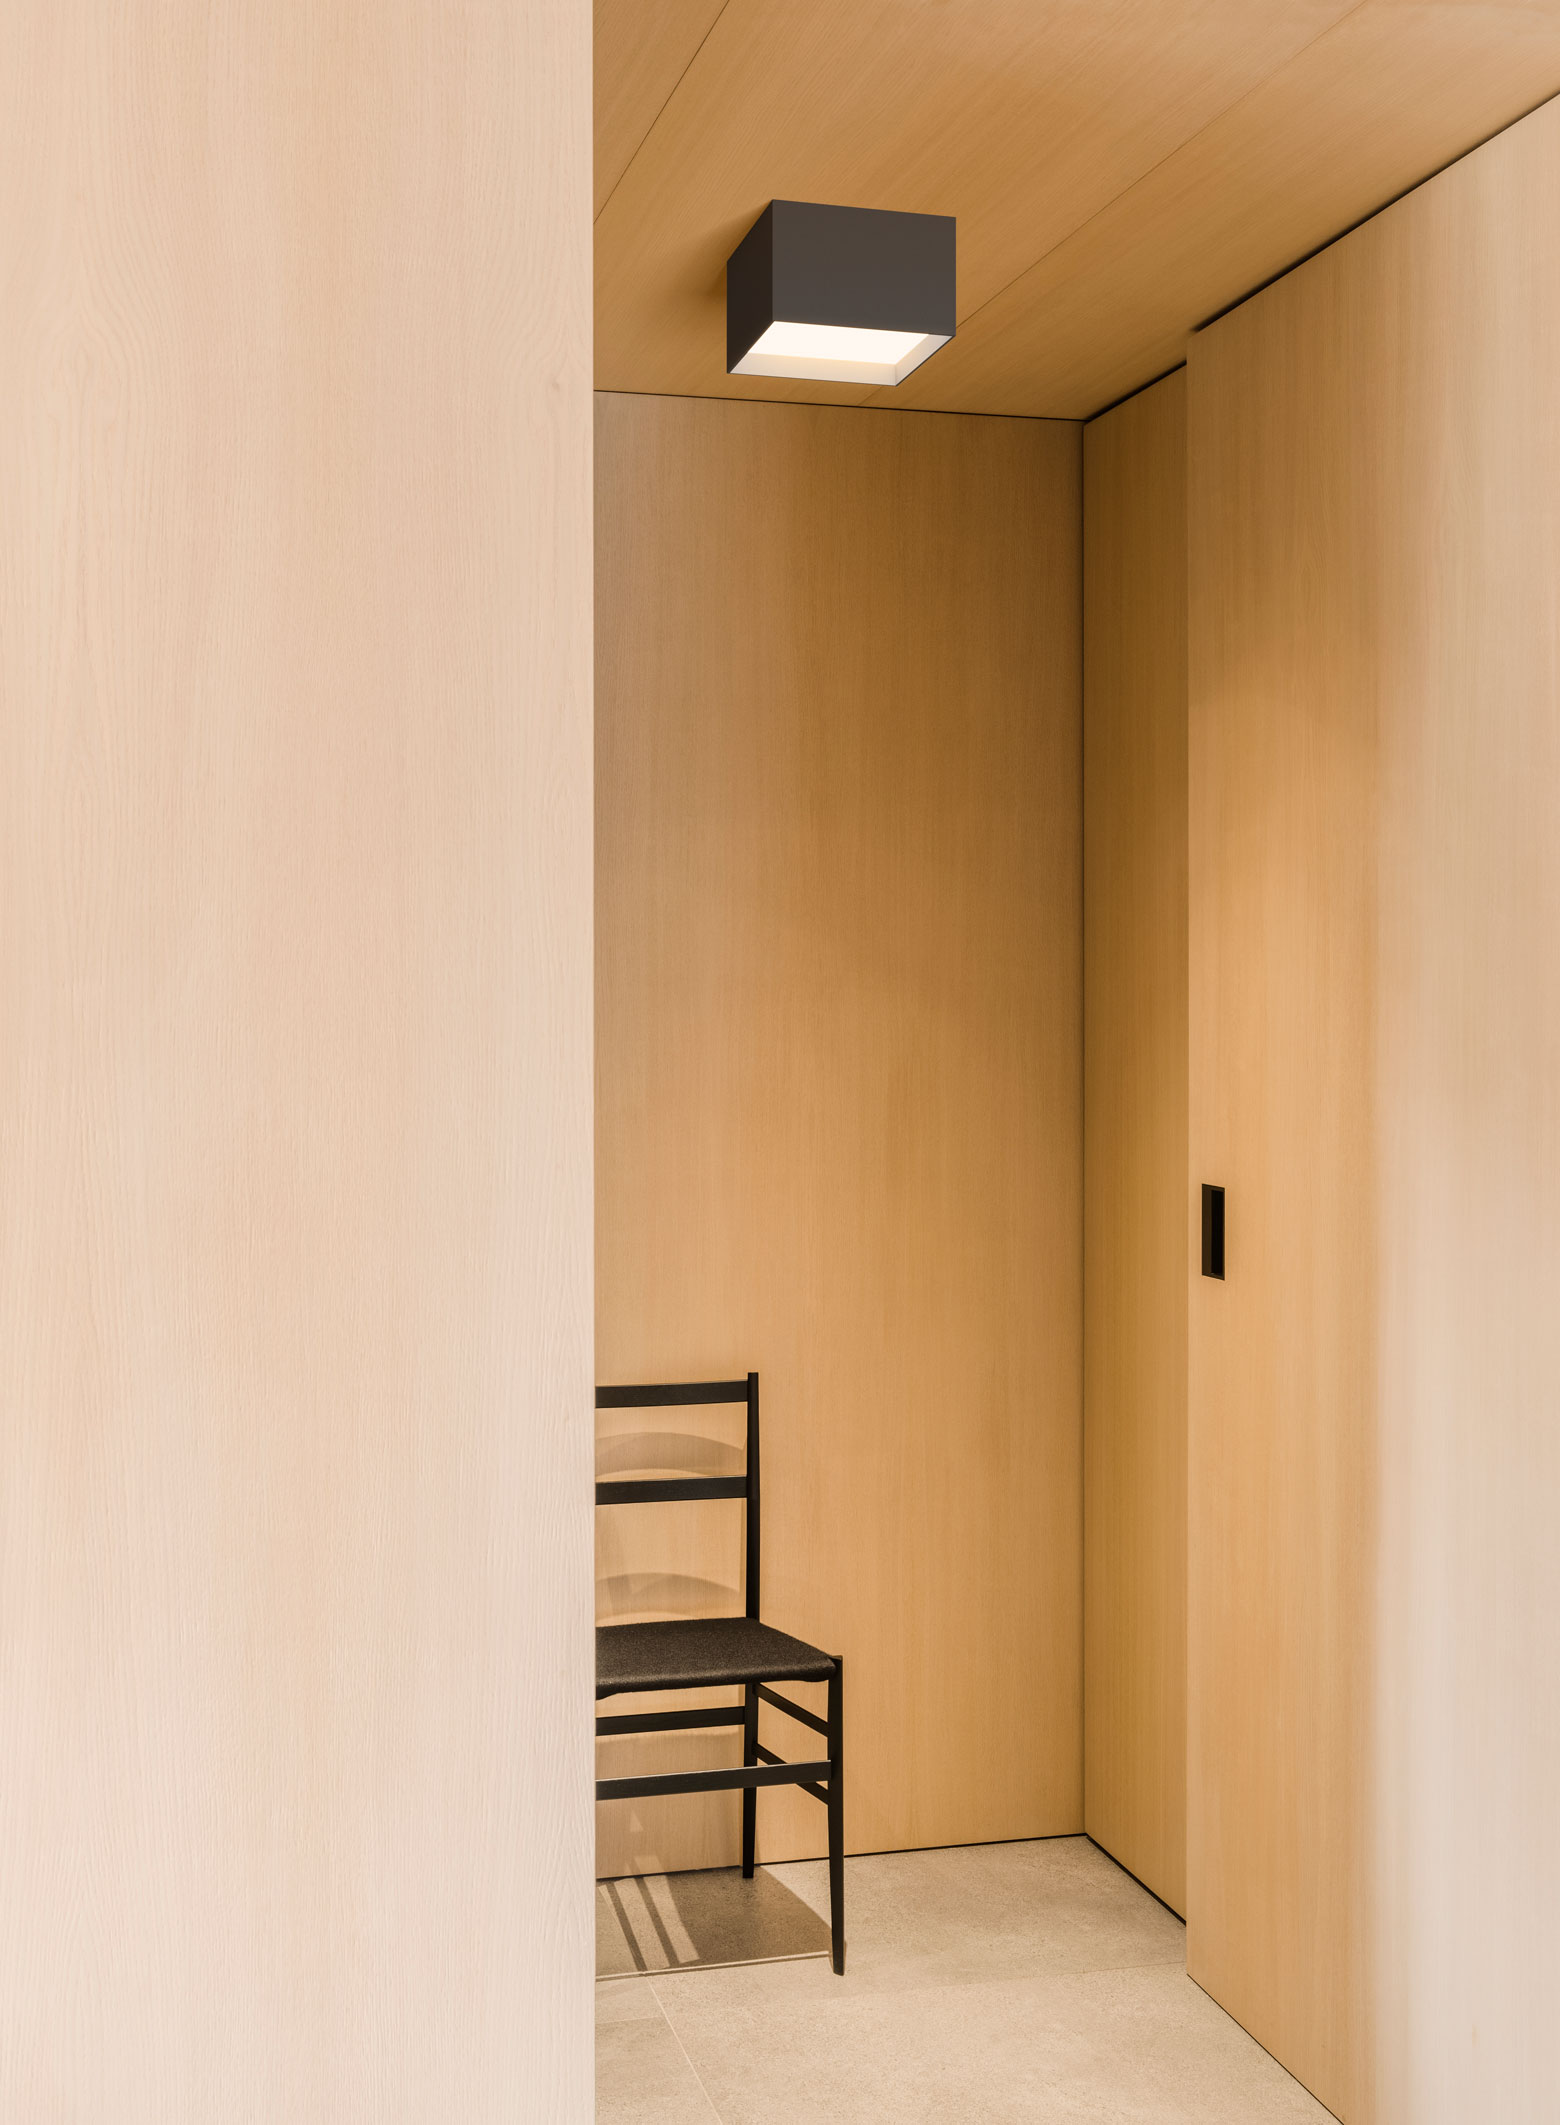 Vibia - The Edit - Introducing Arik Levy’s Structural Ceiling Light for Vibia